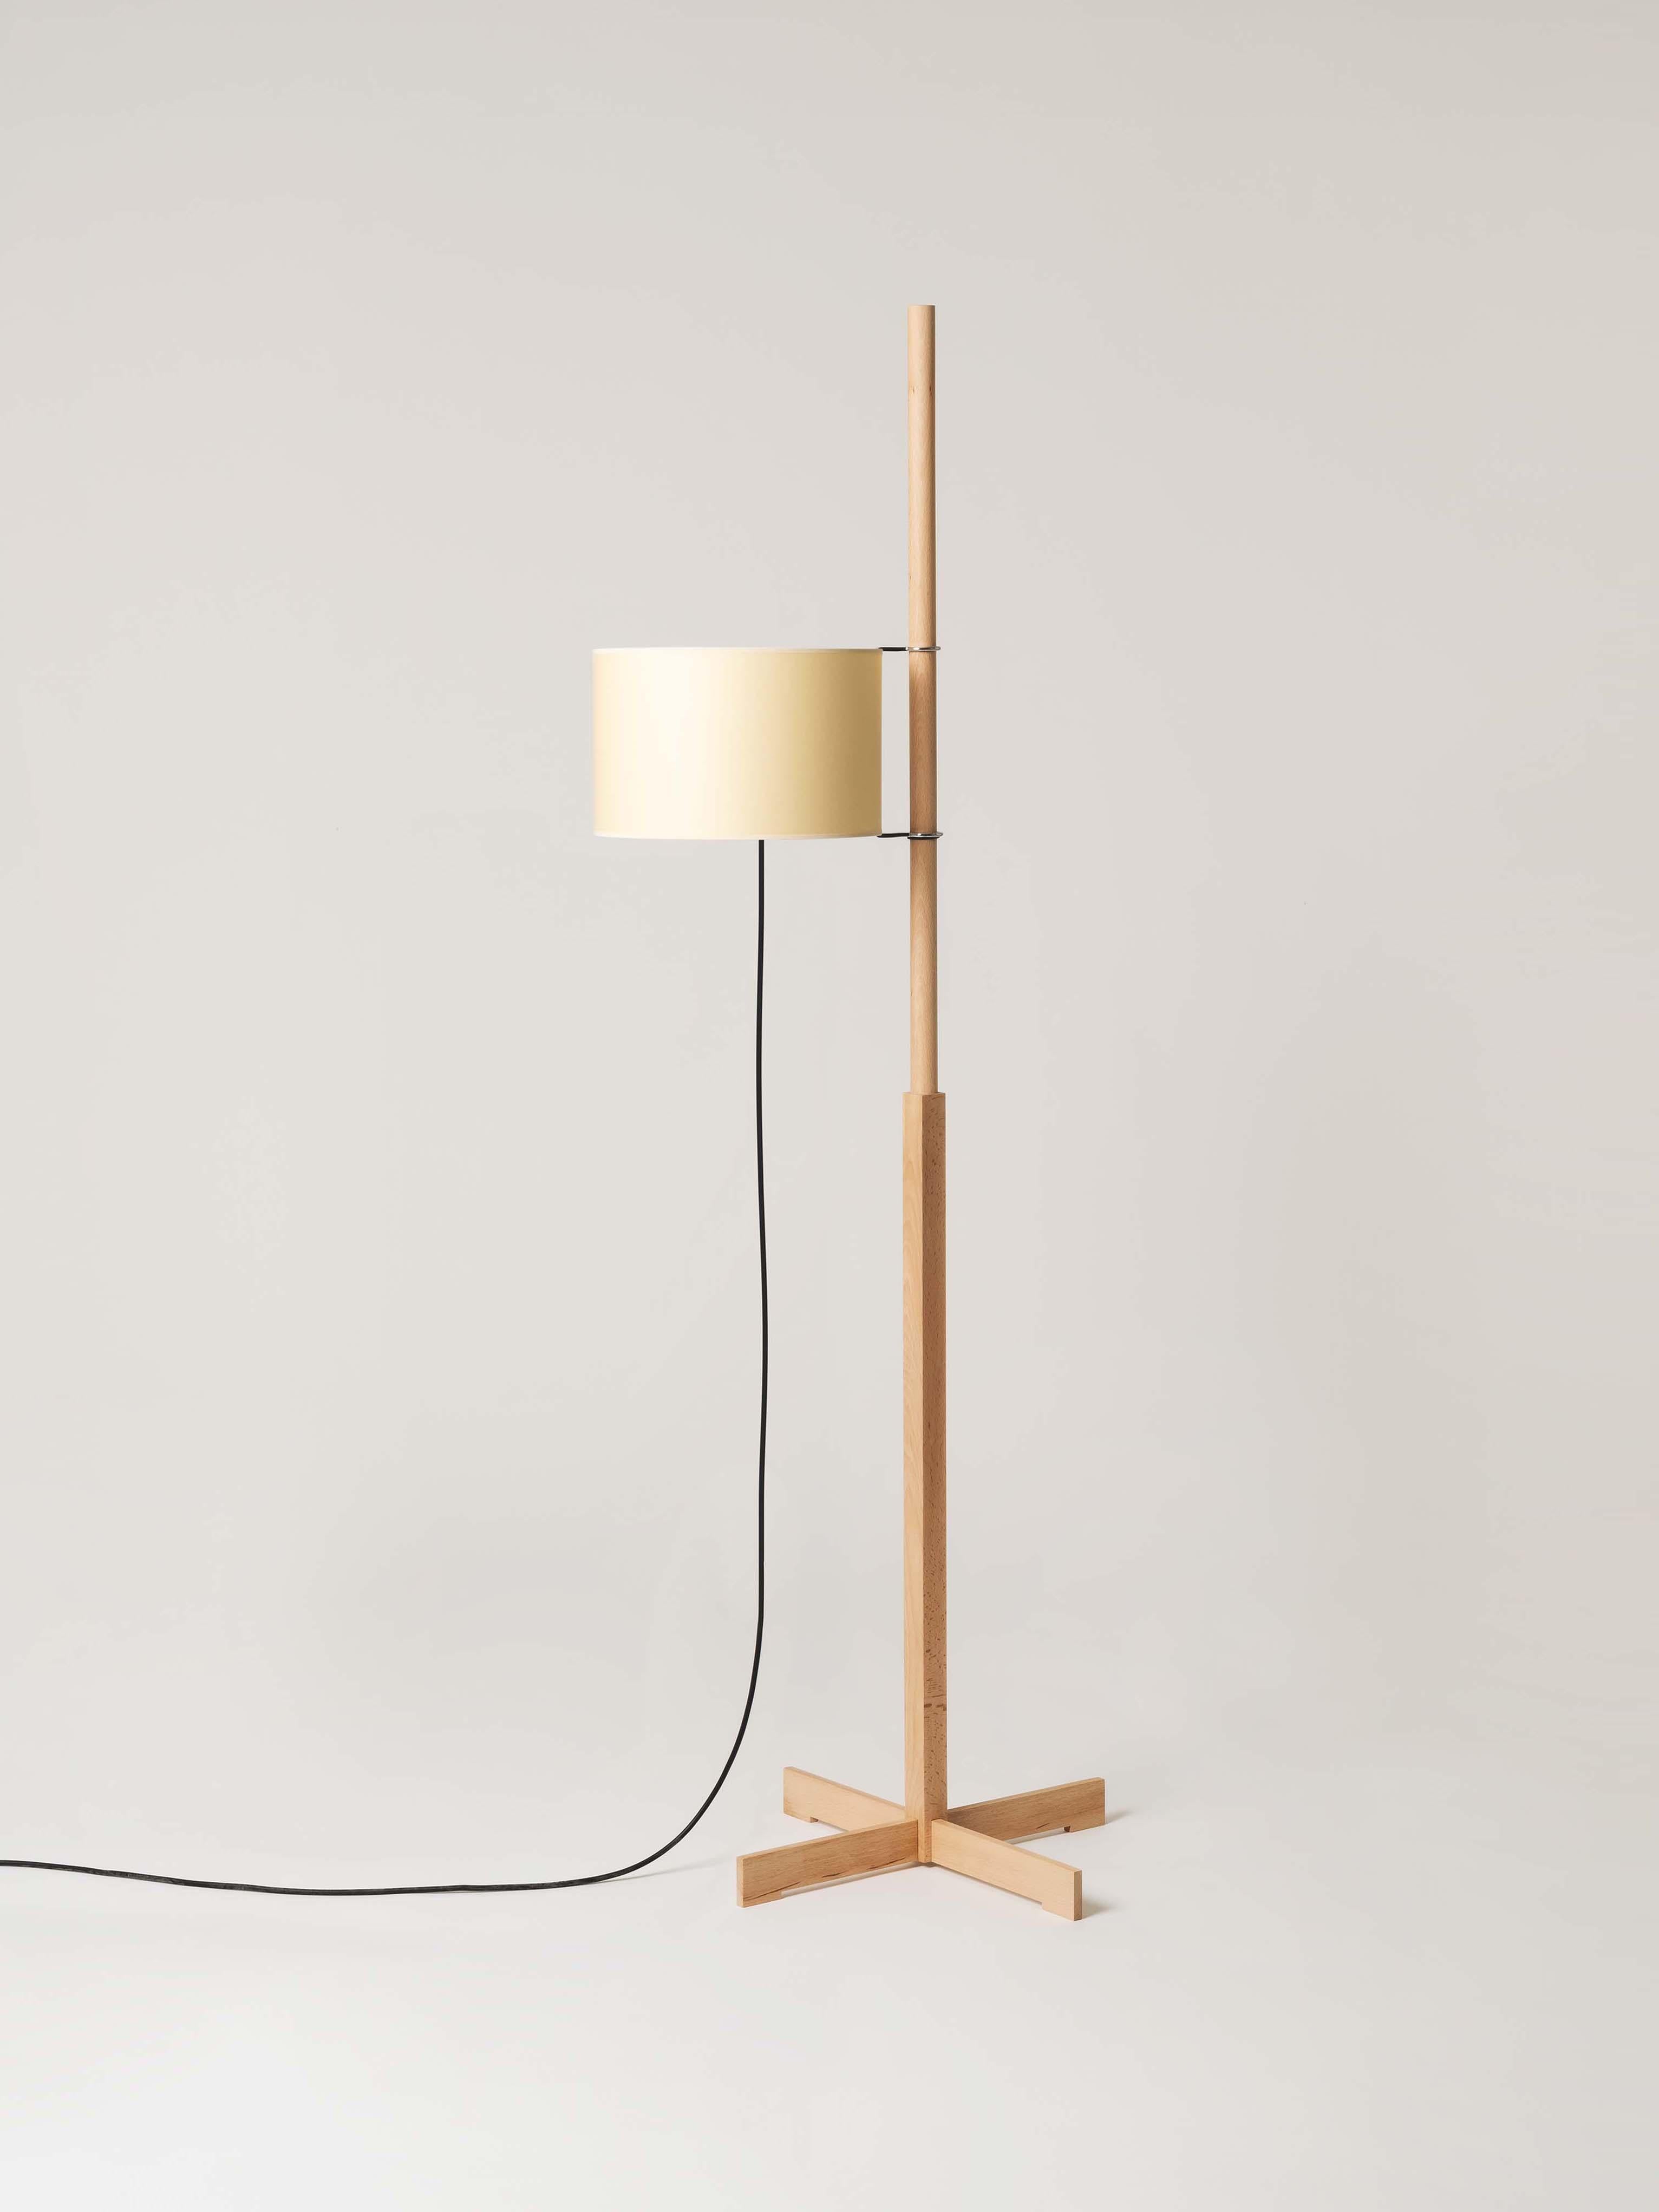 Beige and beech TMM floor lamp by Miguel Milá
Dimensions: D 50 x W 60 x H 166 cm.
Materials: Beech wood, parchment lampshade.
Available in 3 lampshades: beige, white and white with diffuser.
Available in 5 woods: beech, cherry, walnut, natural